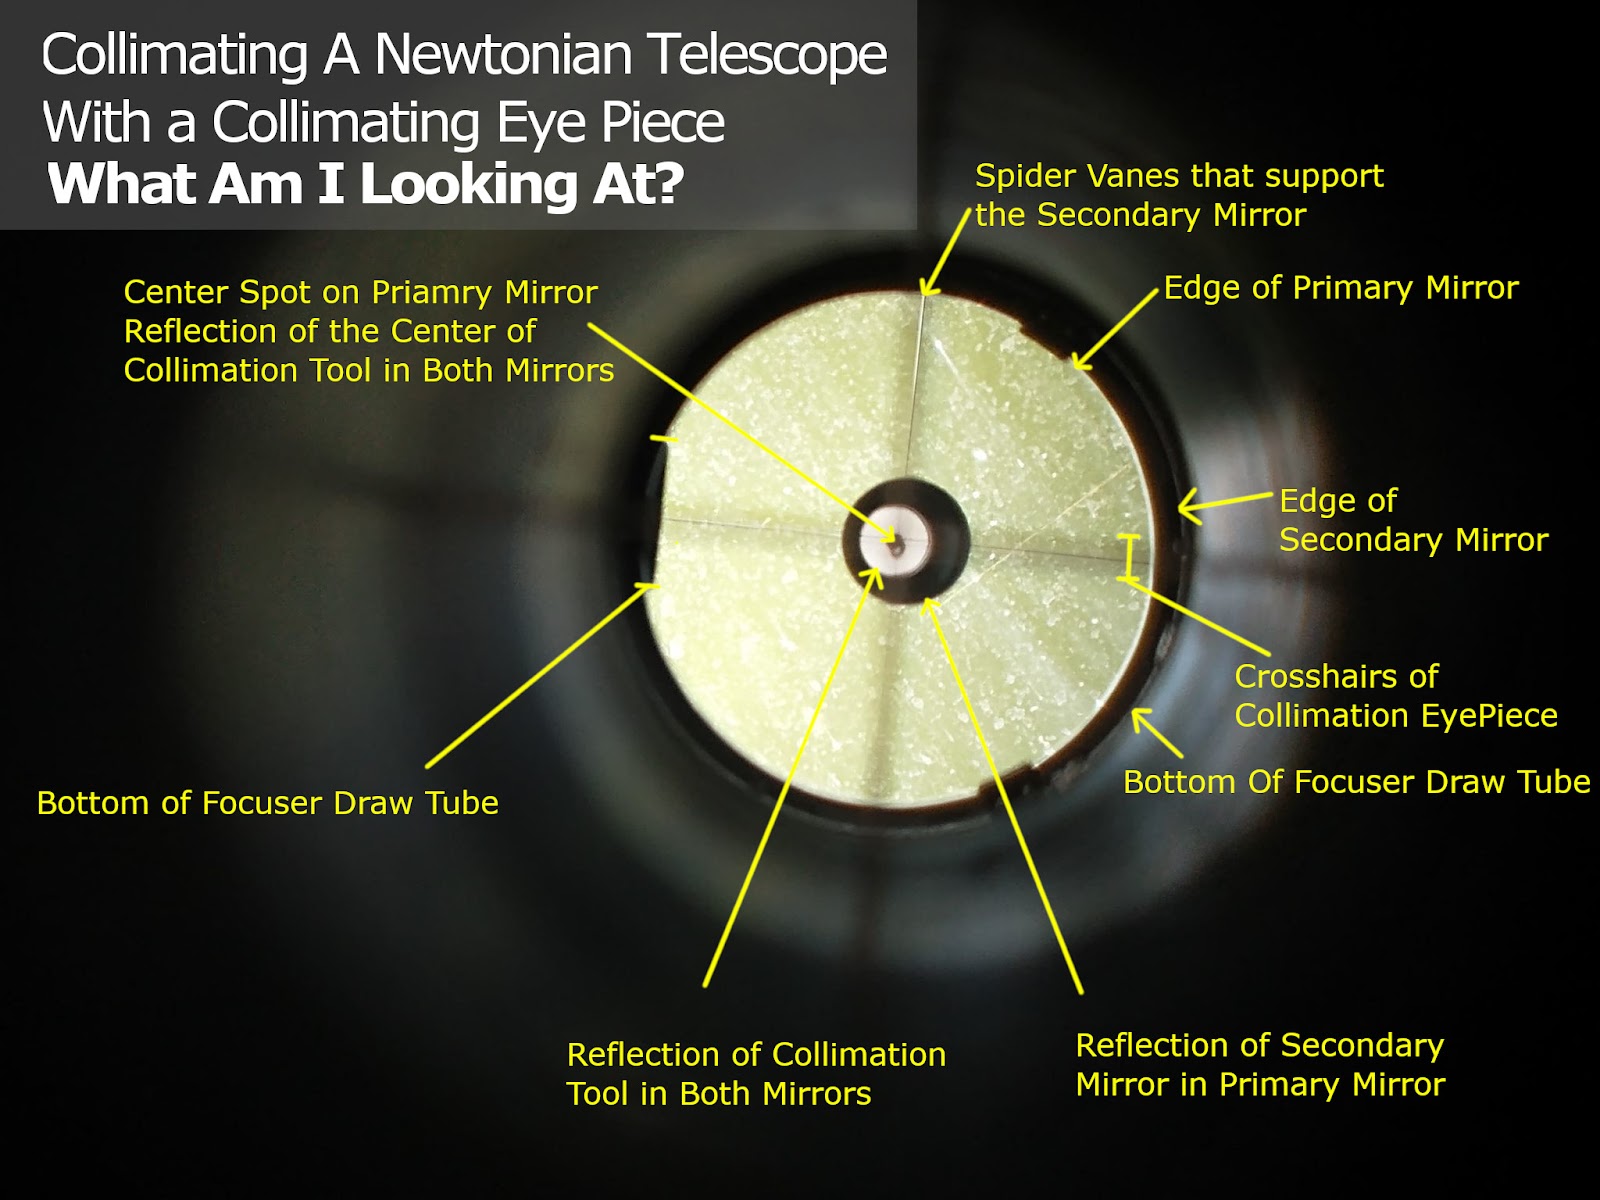 Collimating a Newtonian Telescope